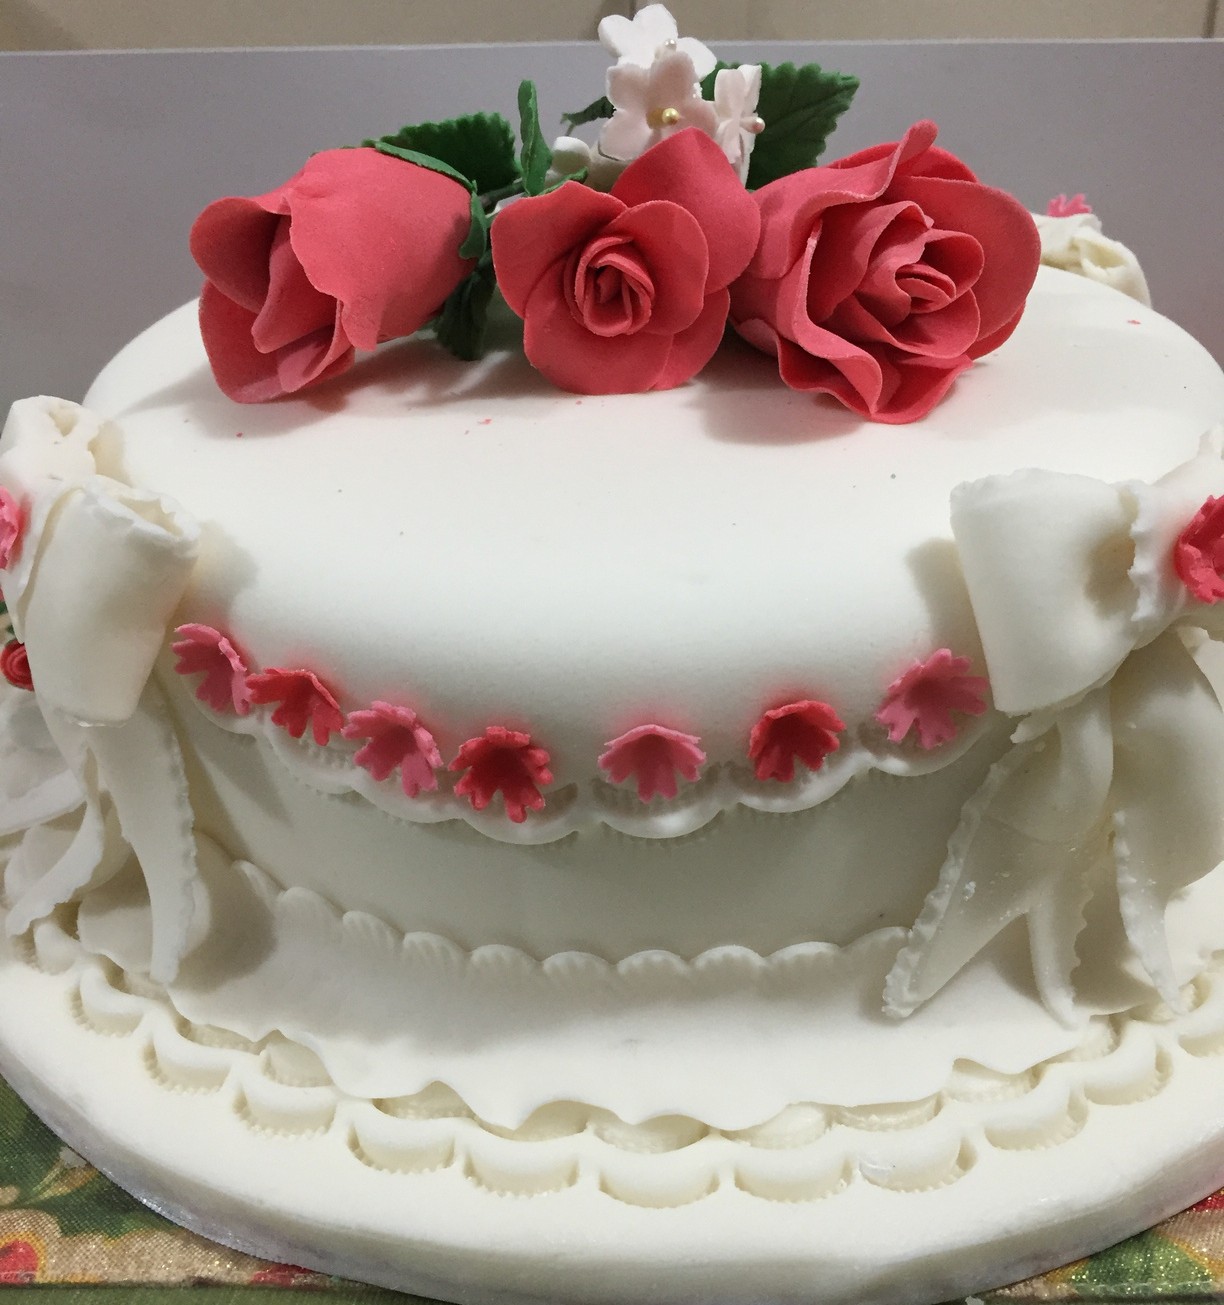 A white cake with pink roses

Description automatically generated with low confidence